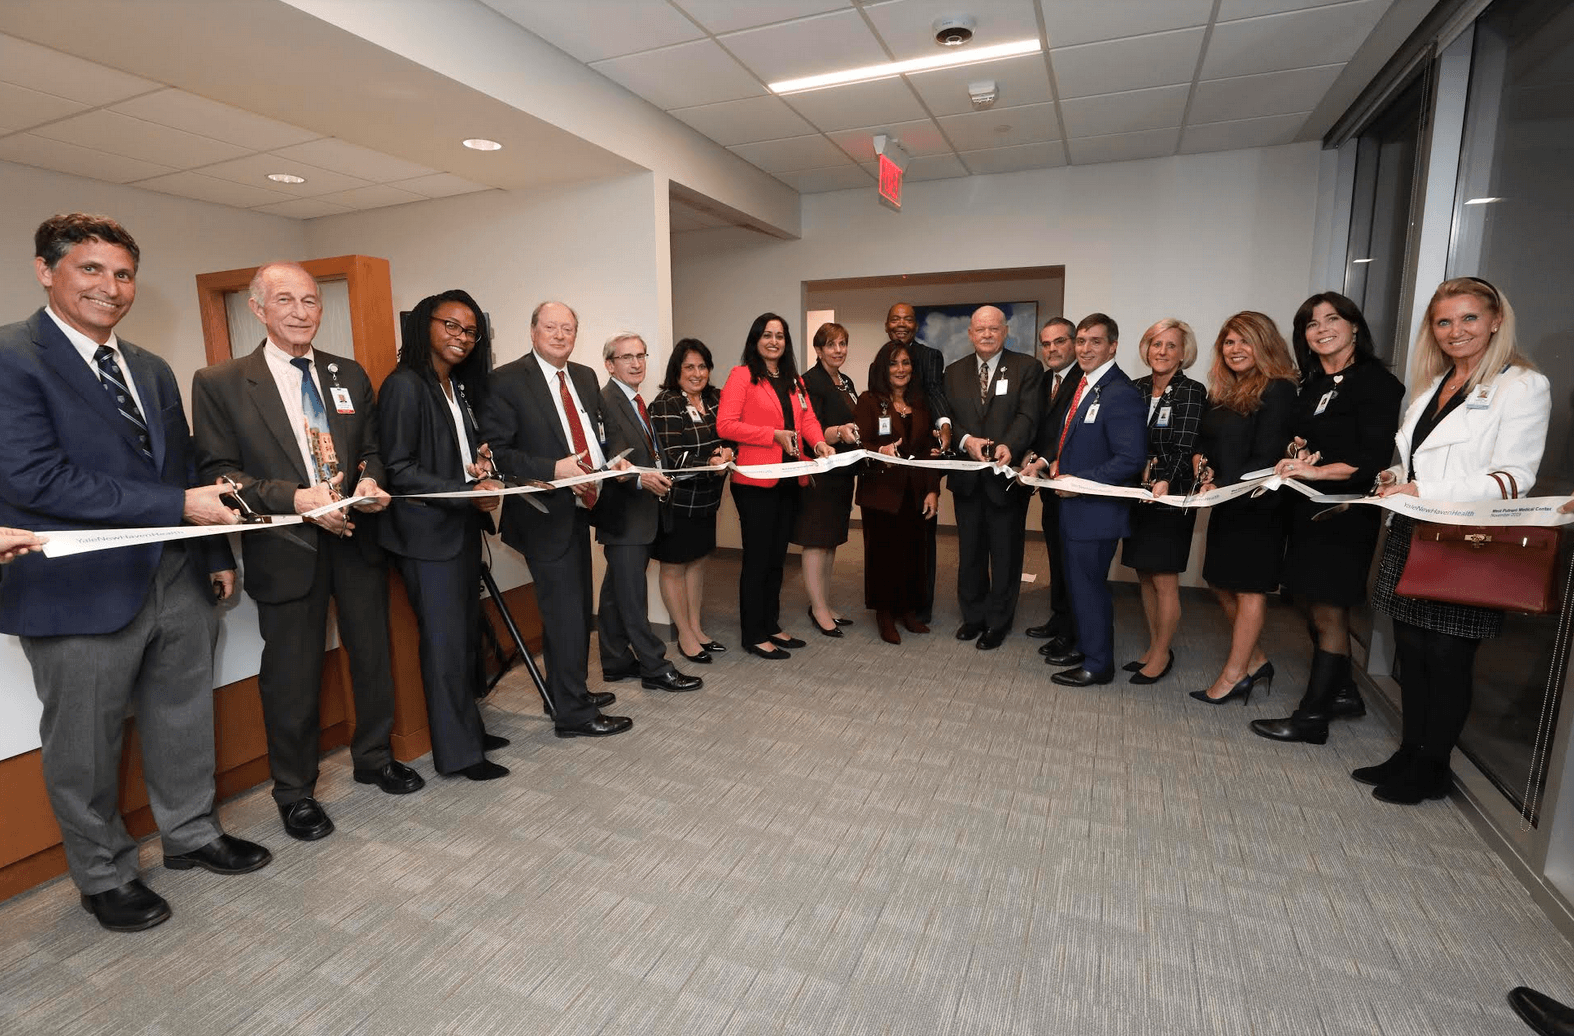 The mood was festive as leaders from Yale New Haven Health cut the ribbon at the new West Putnam Medical Center at 500 West Putnam Ave. in Greenwich, which includes a variety of outpatient services provided by Greenwich Hospital, Yale New Haven Health Heart and Vascular Center, Yale Medicine and Northeast Medical Group. Contributed photo